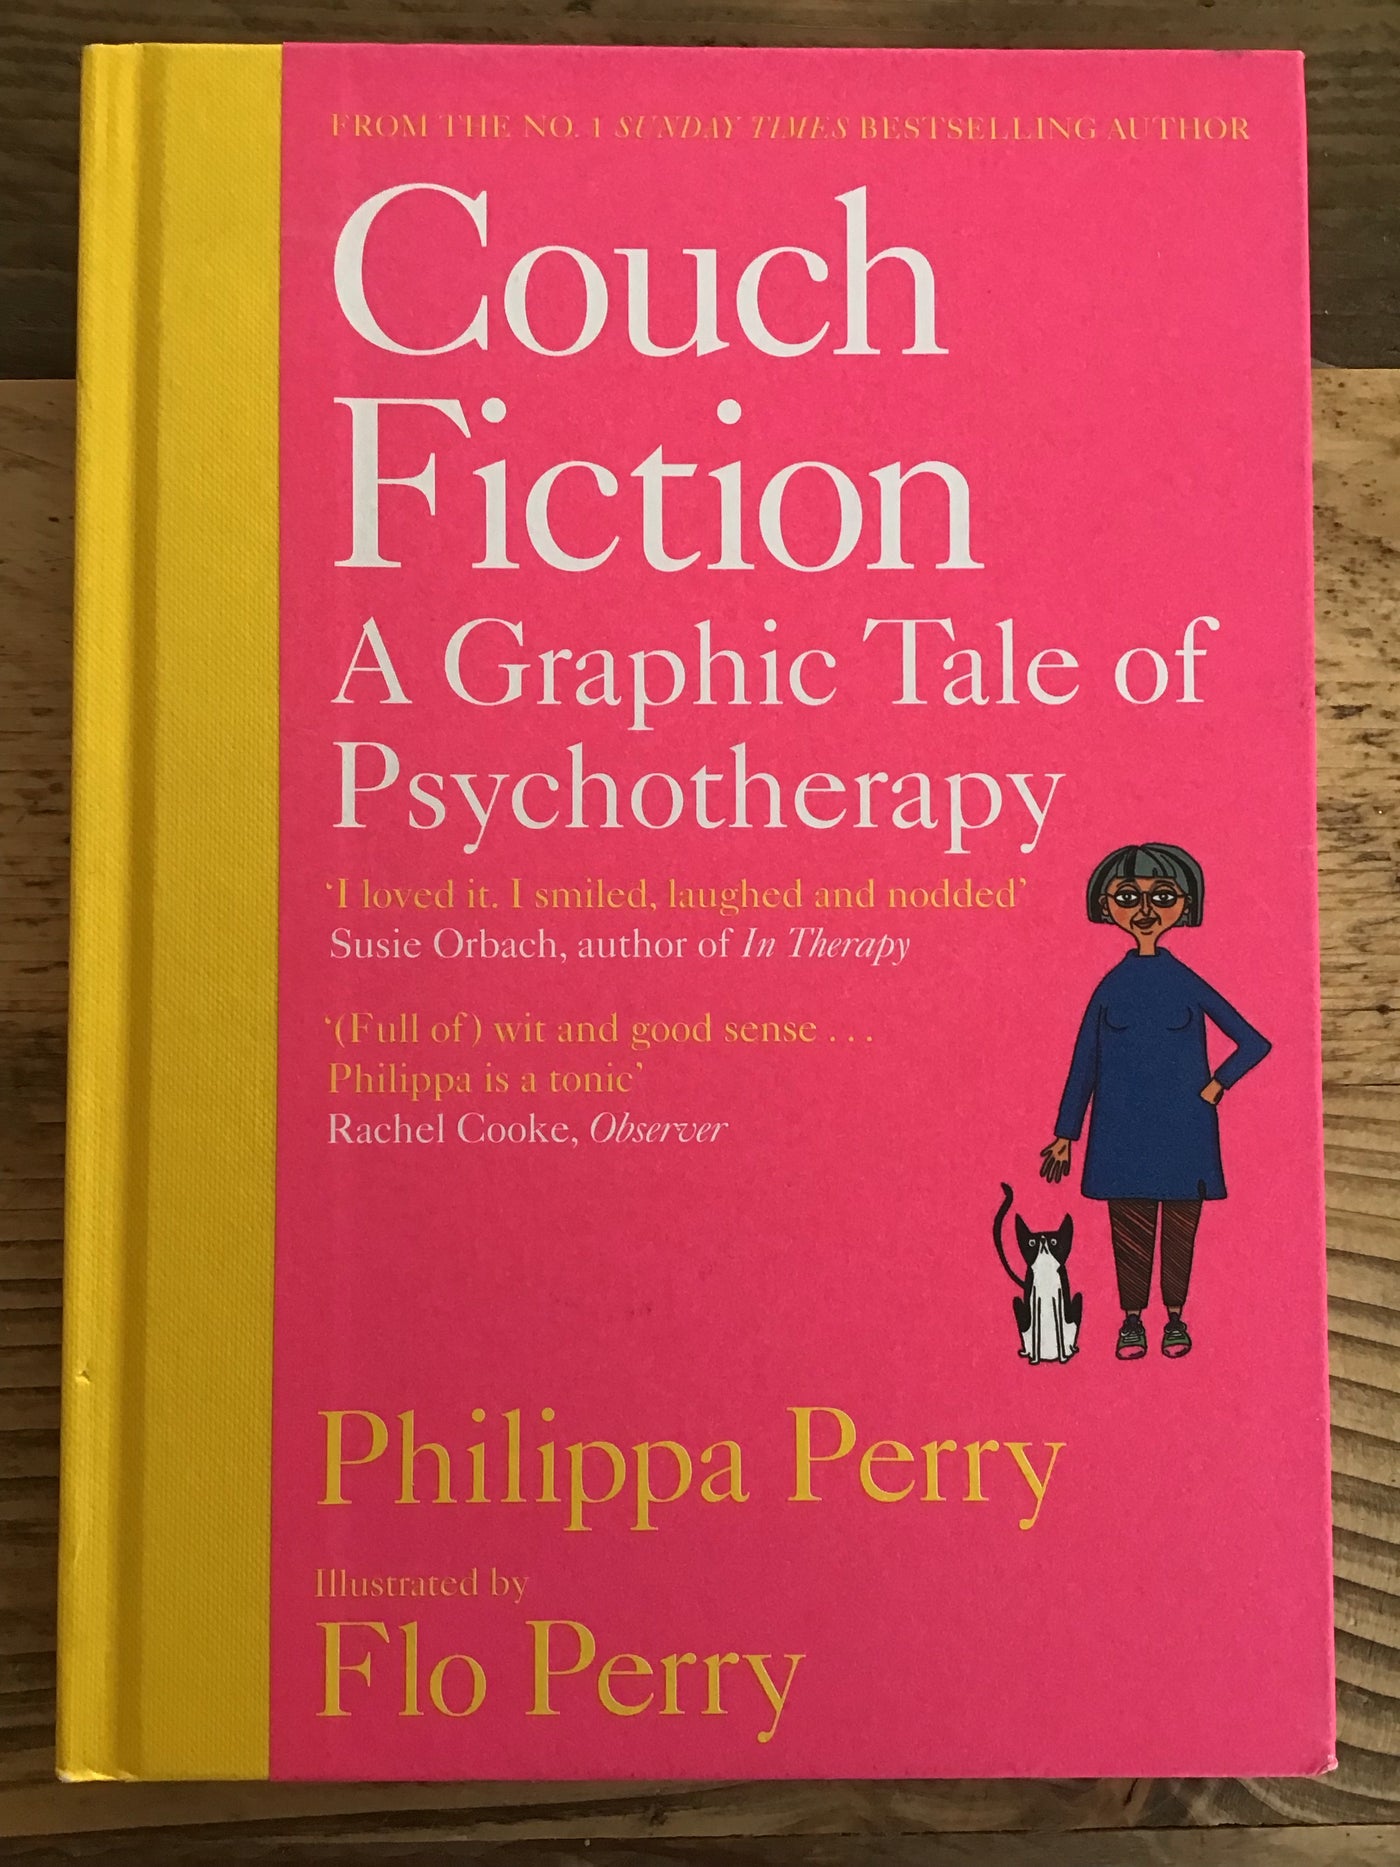 Couch Fiction